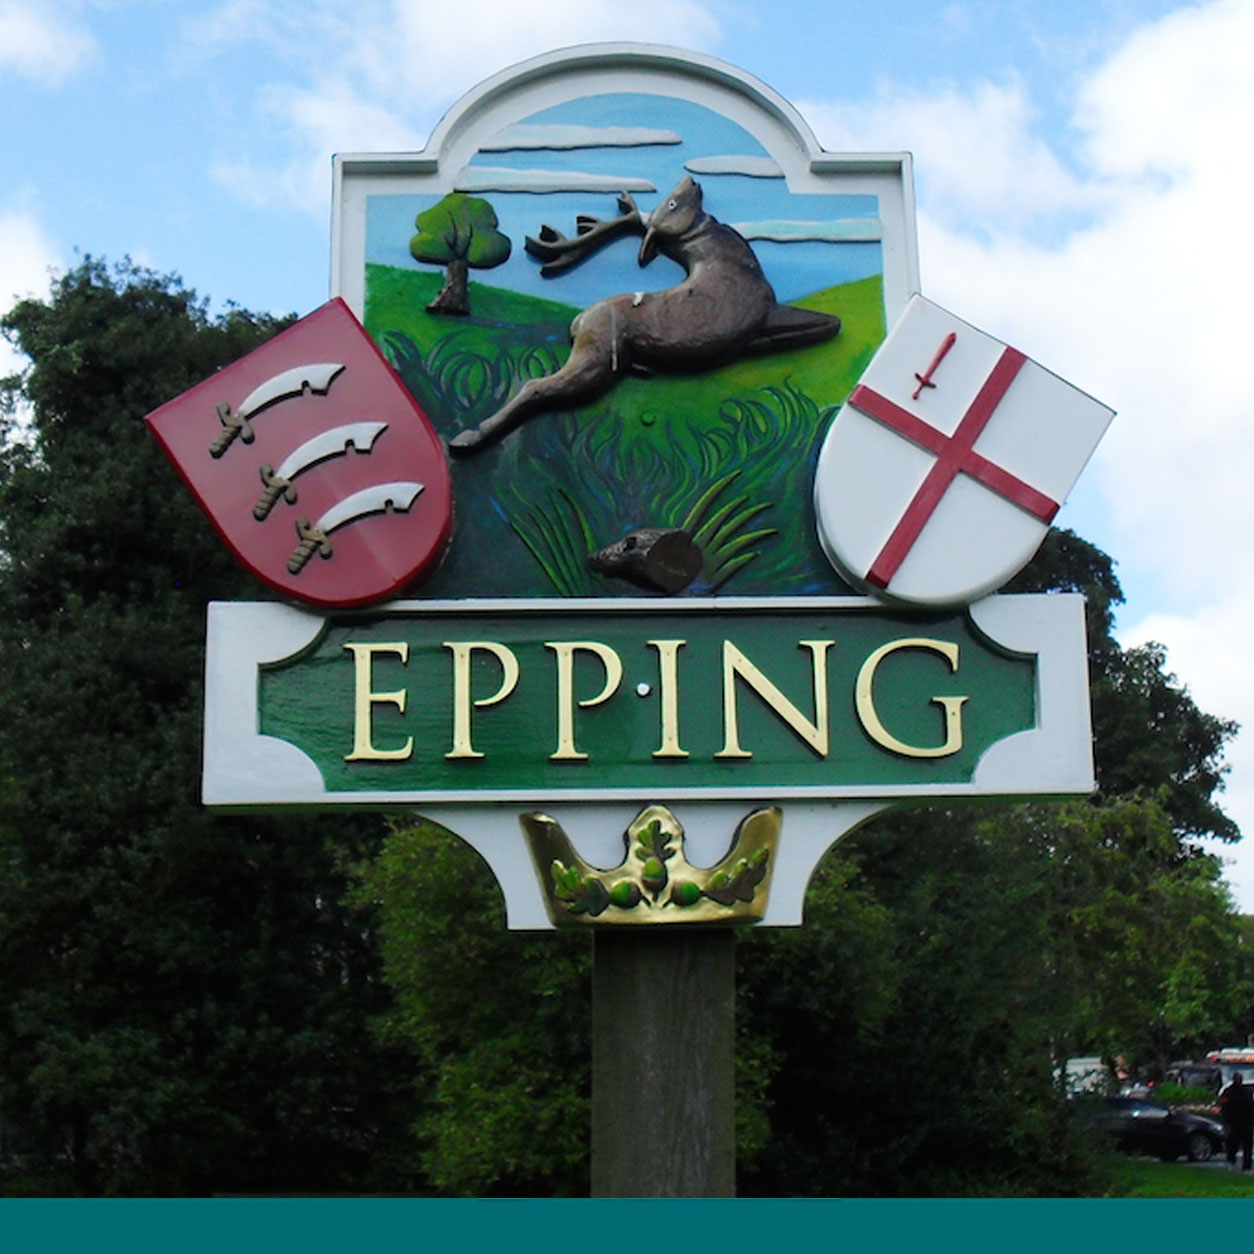 About Epping